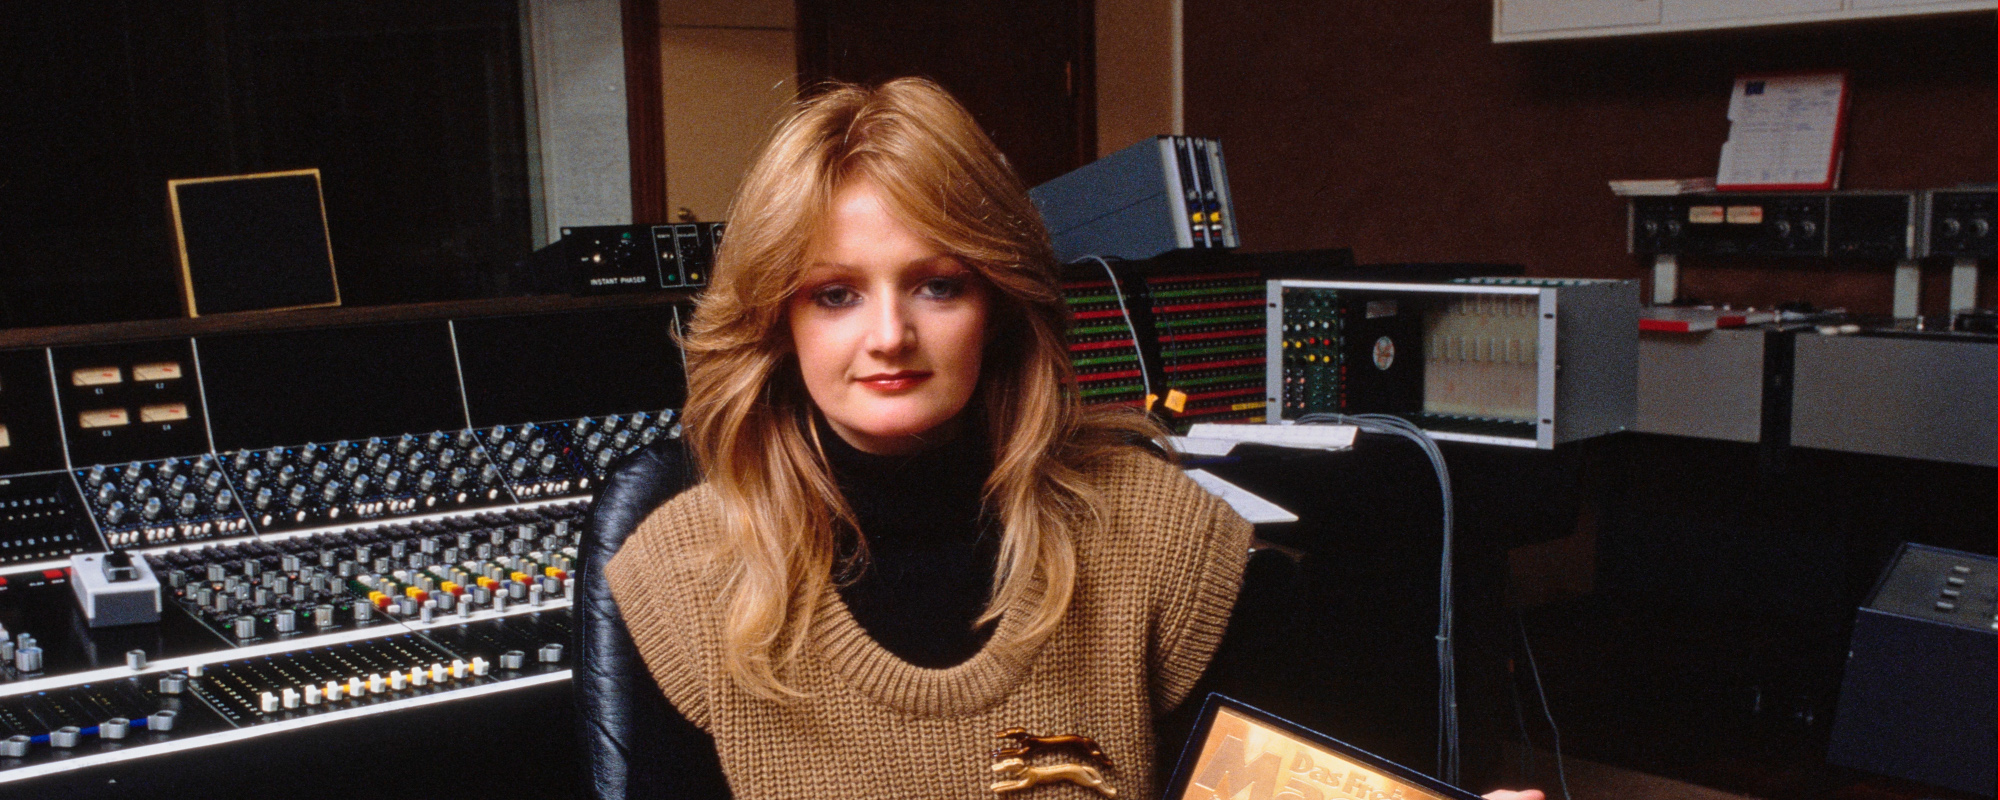 The Meaning Behind the Extravagant “Holding Out for a Hero” by Bonnie Tyler